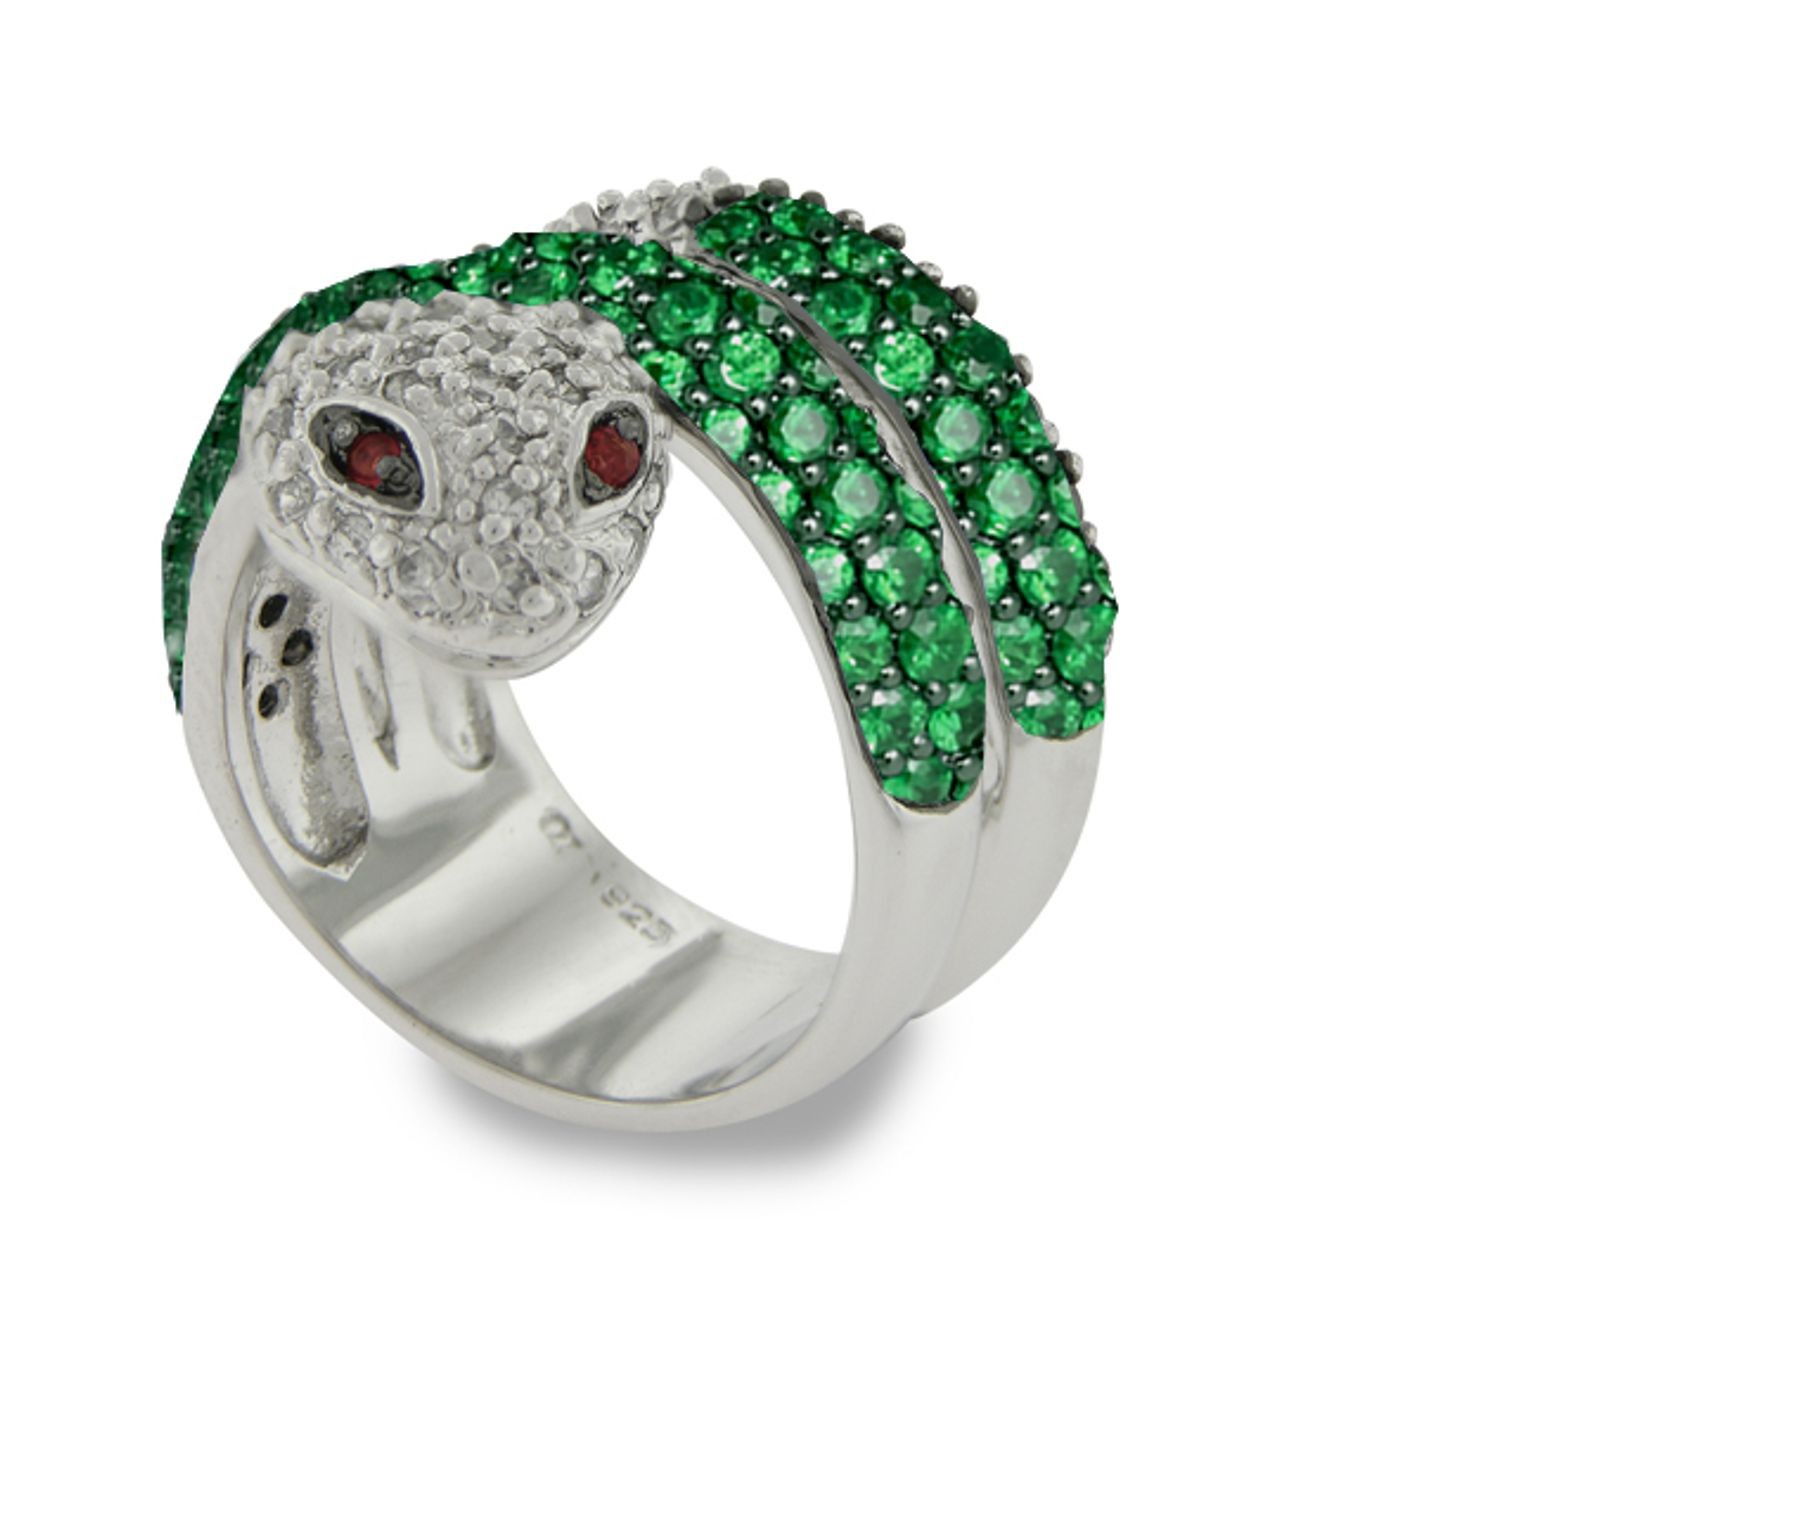 French Micropave Diamond Emerald Double Wrap Gold Serpent Ring with 2.25 cts genuine richly cut emerald